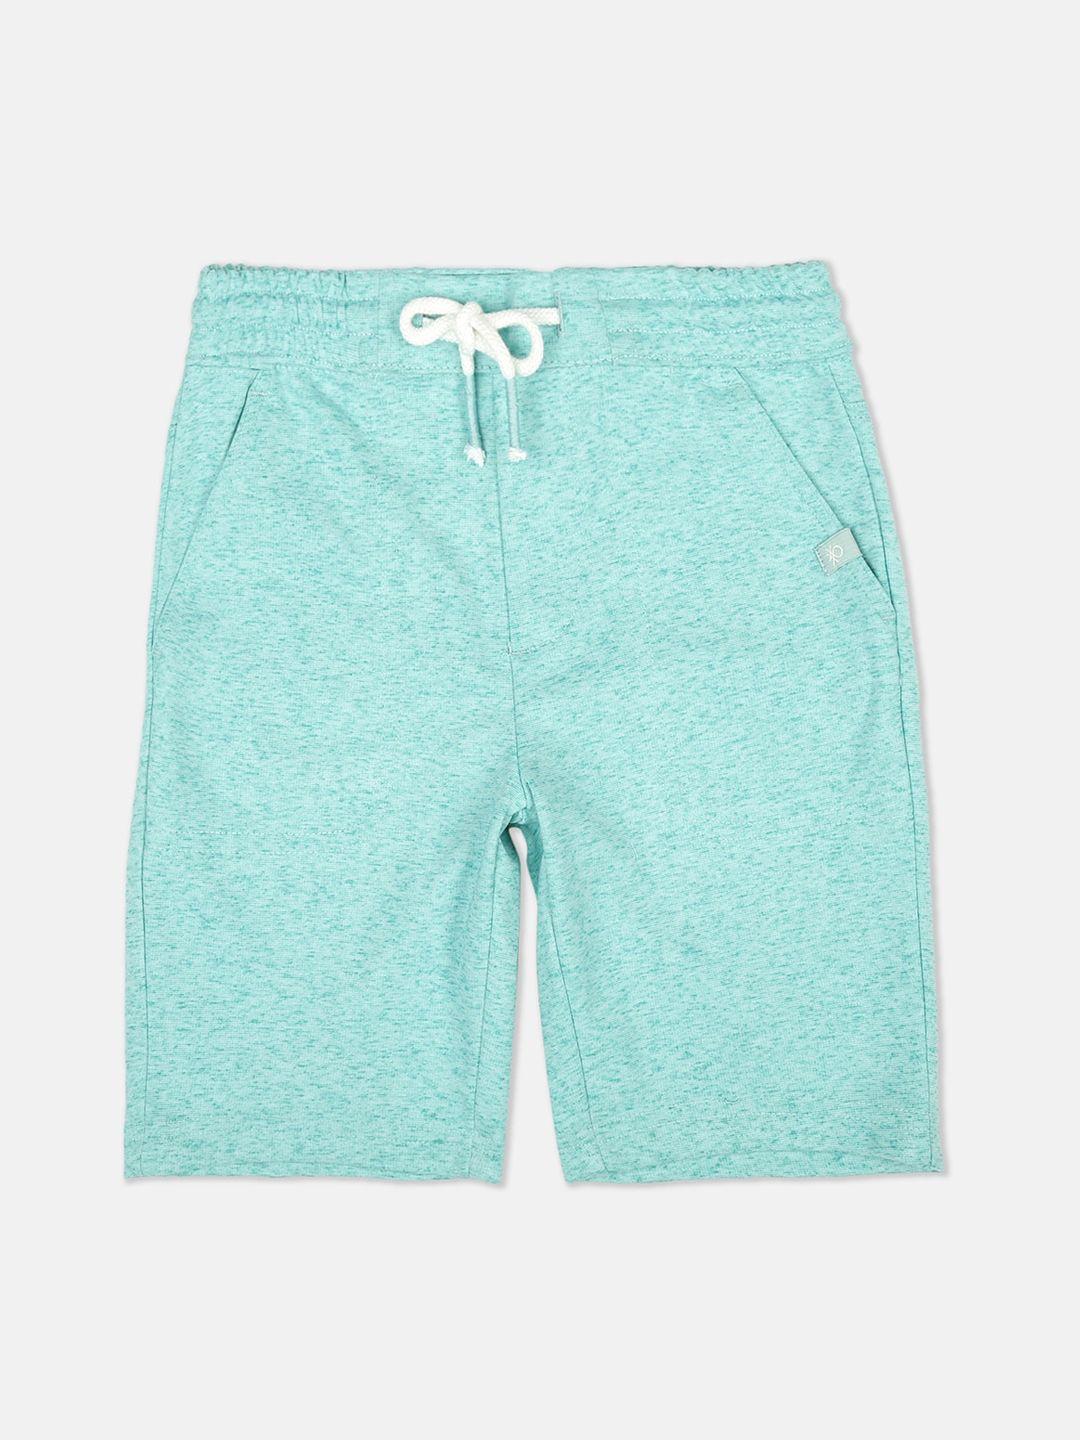 united colors of benetton boys green shorts